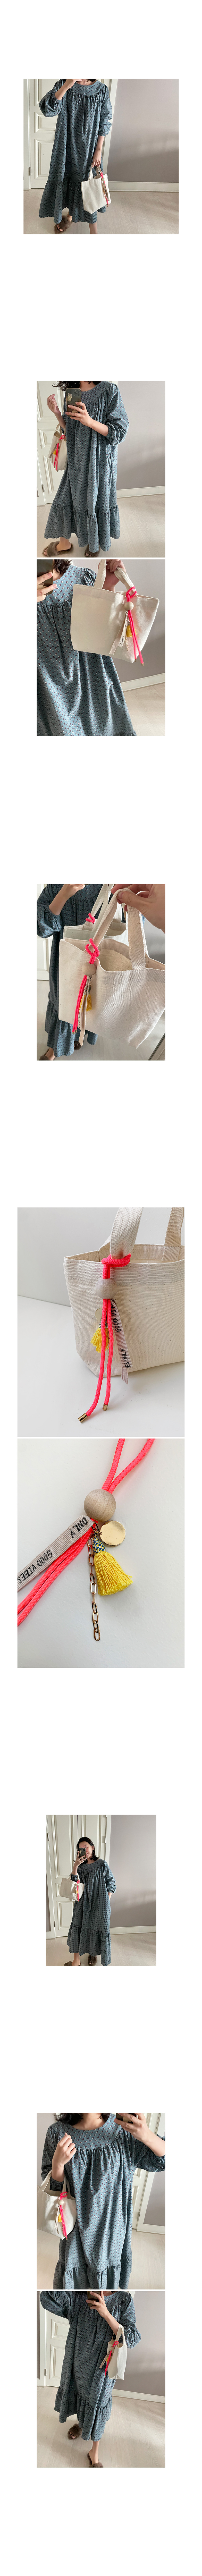 Tassel and Wooden Ball Fastener Accent Strap|